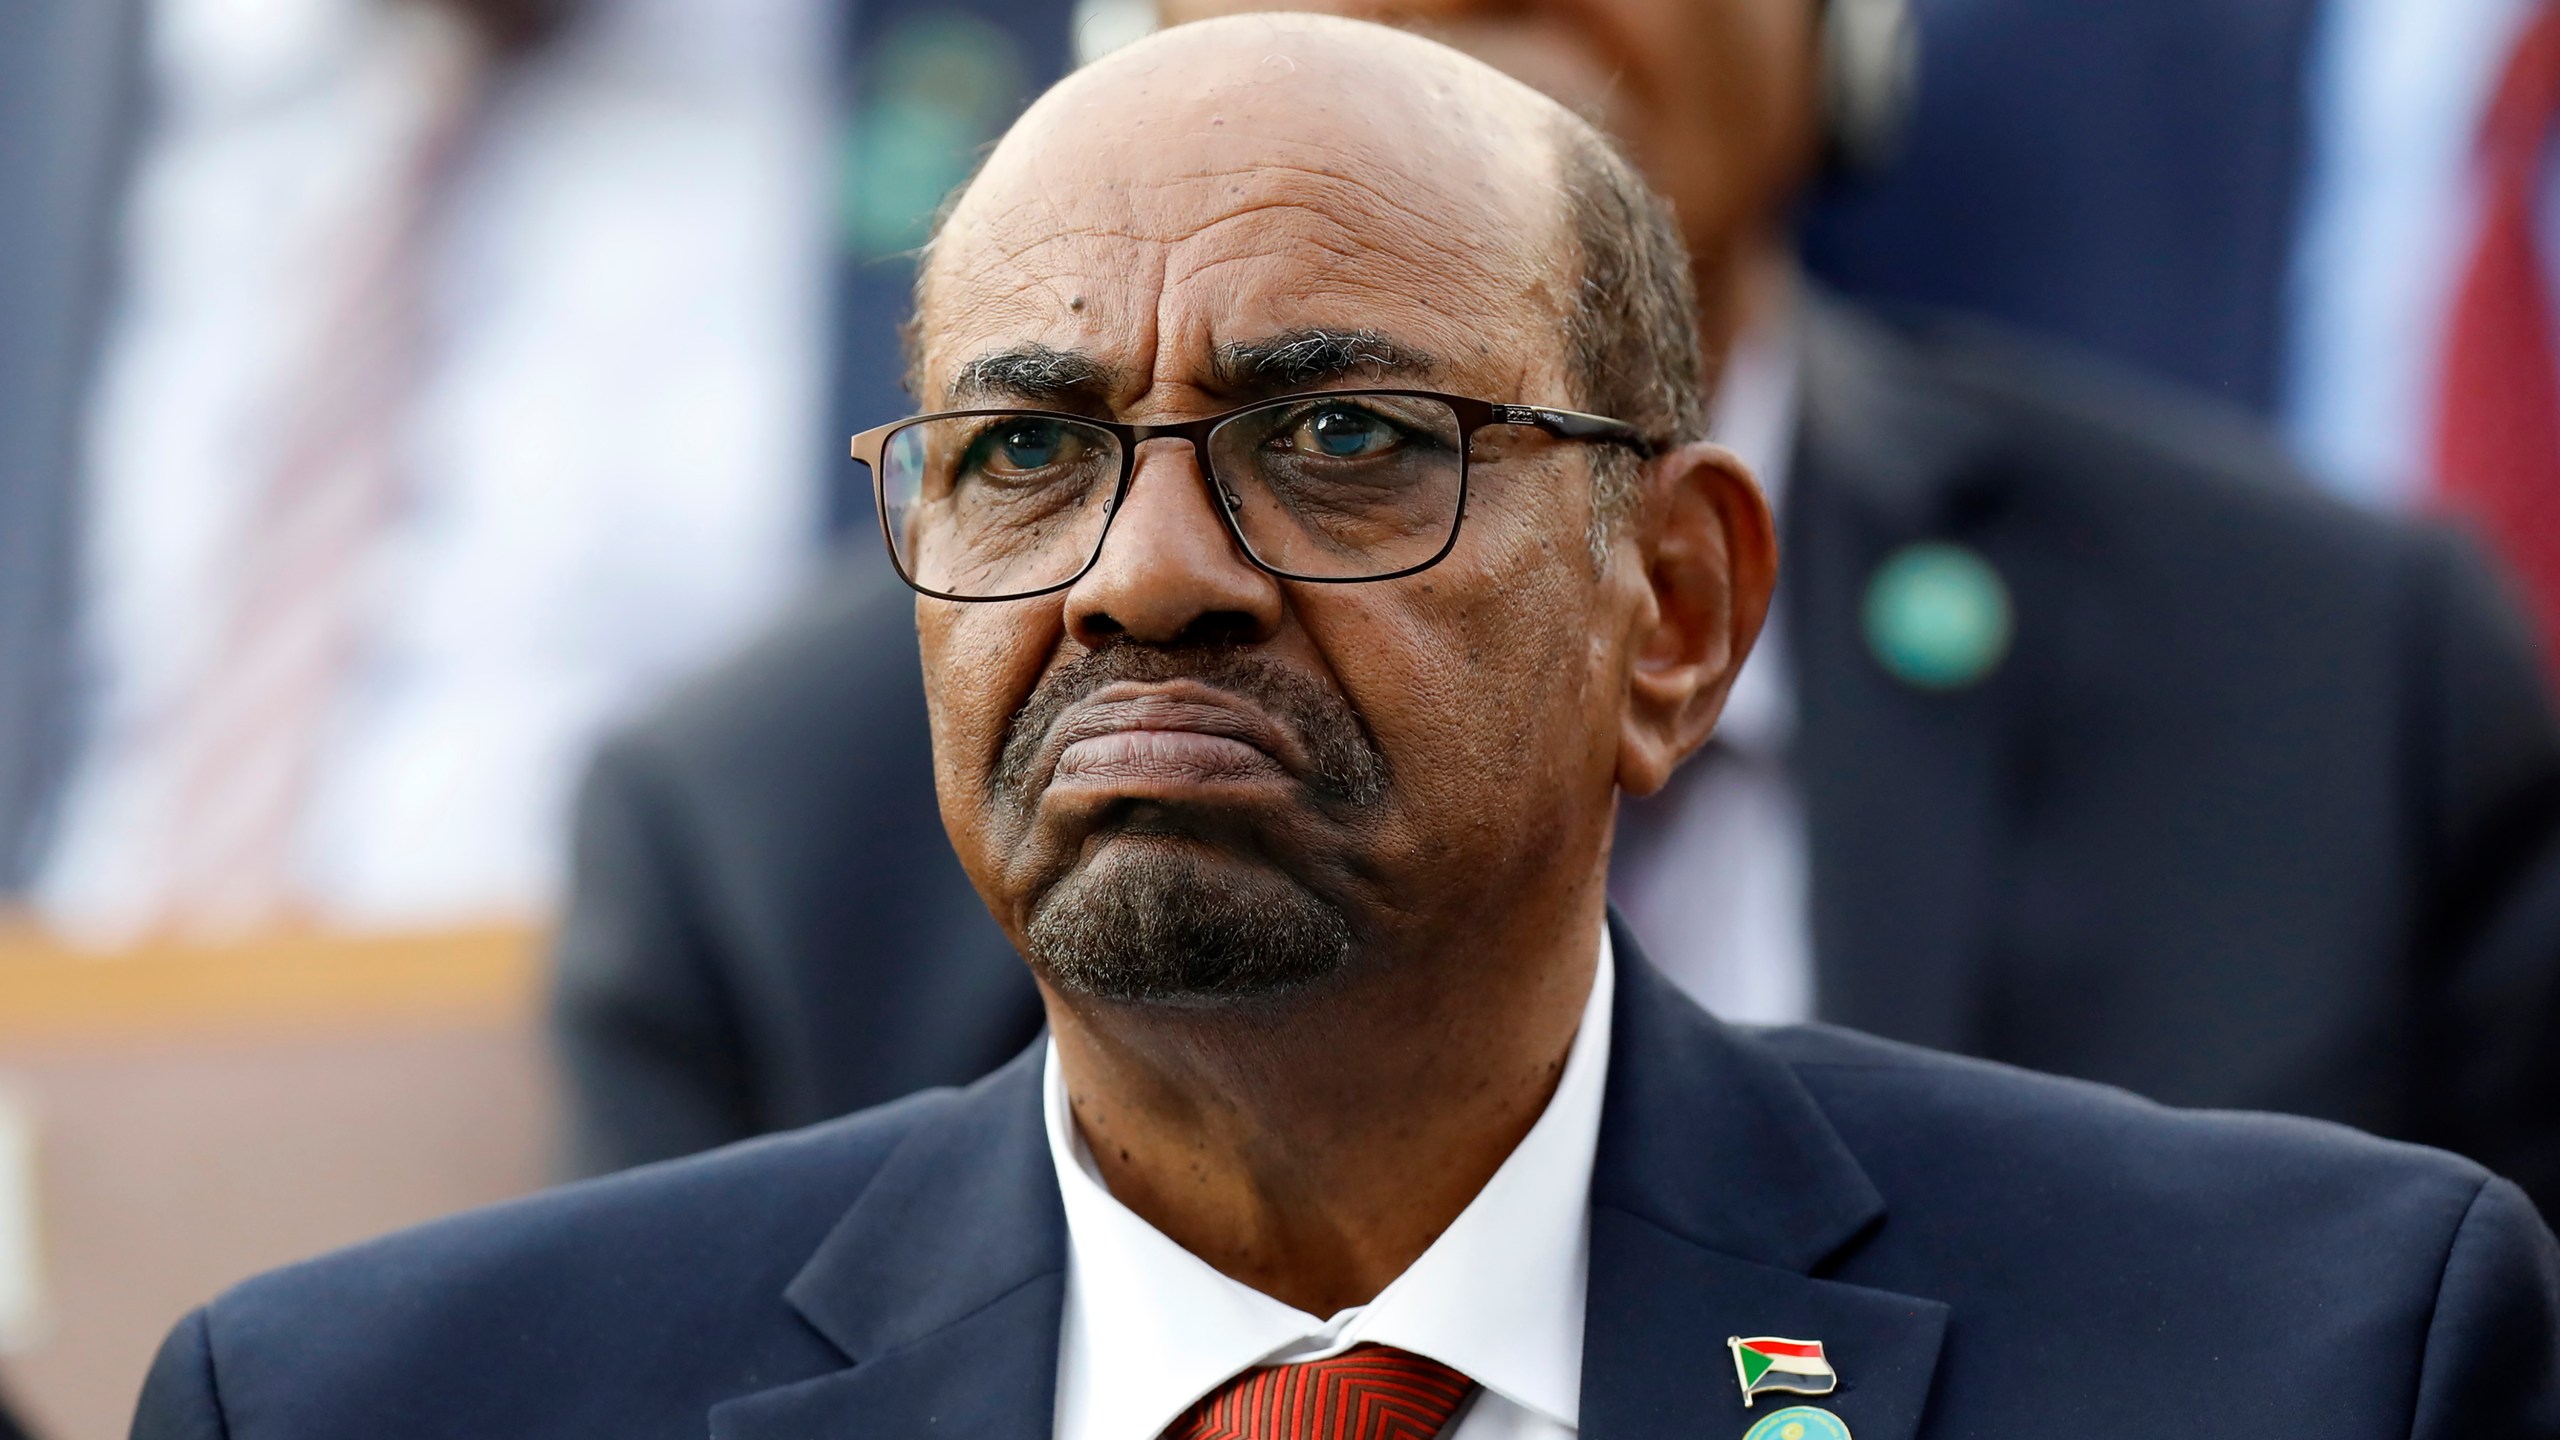 FILE - Sudan's President Omar al-Bashir attends a ceremony for Turkey's President Recep Tayyip Erdogan, at the Presidential Palace, July 9, 2018, in Ankara, Turkey. Ousted Sudanese strongman Omar al-Bashir was charged by the International Criminal Court on allegations including genocide in his country's Darfur region. (AP Photo/Burhan Ozbilici, File)